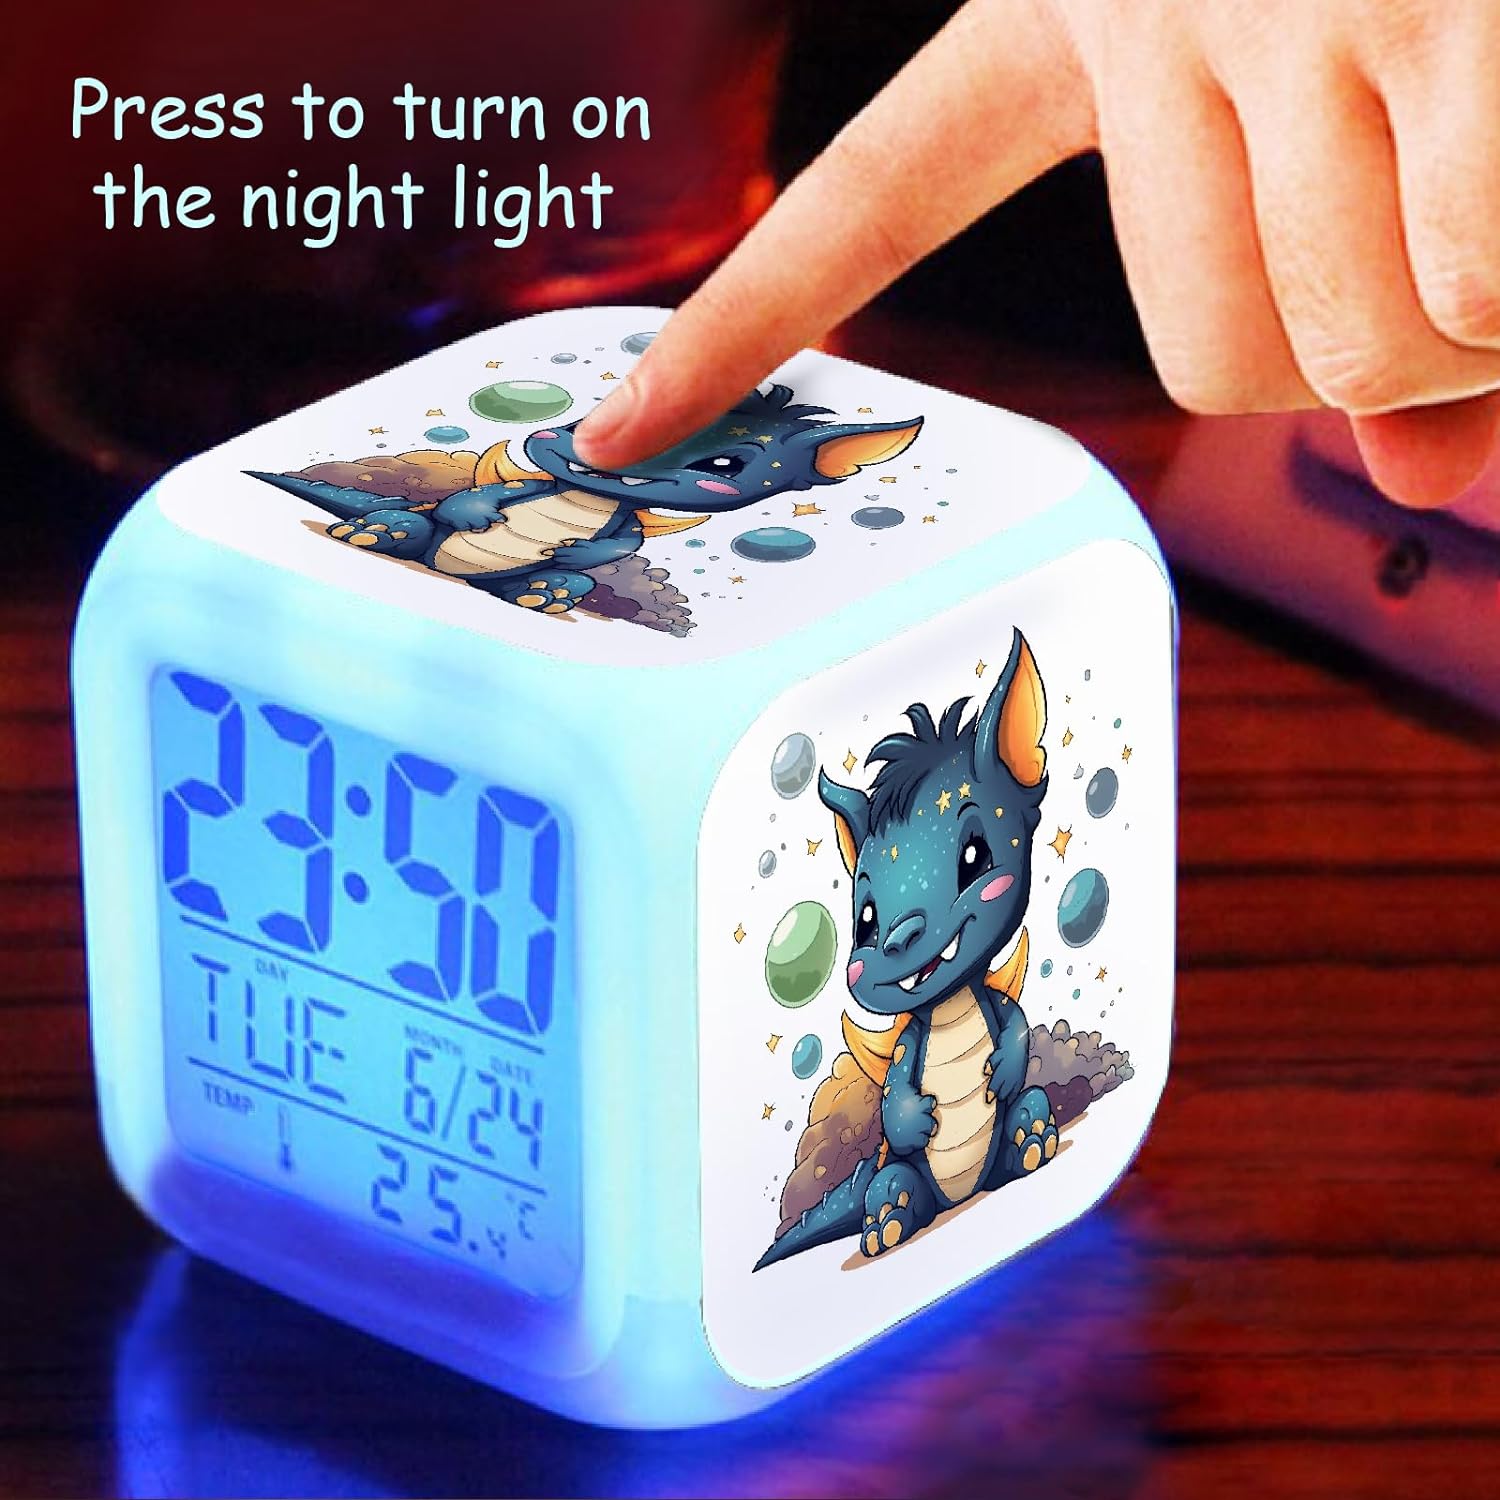 ZonleeApex Kids Digital Alarm Clock with Dragon for Boys Girls Ages 6-13, Cute Cube Introductory Alarm Clock with Night Light for Bedroom Decor Gift Ideas (3.15x3.15x3.15inch)